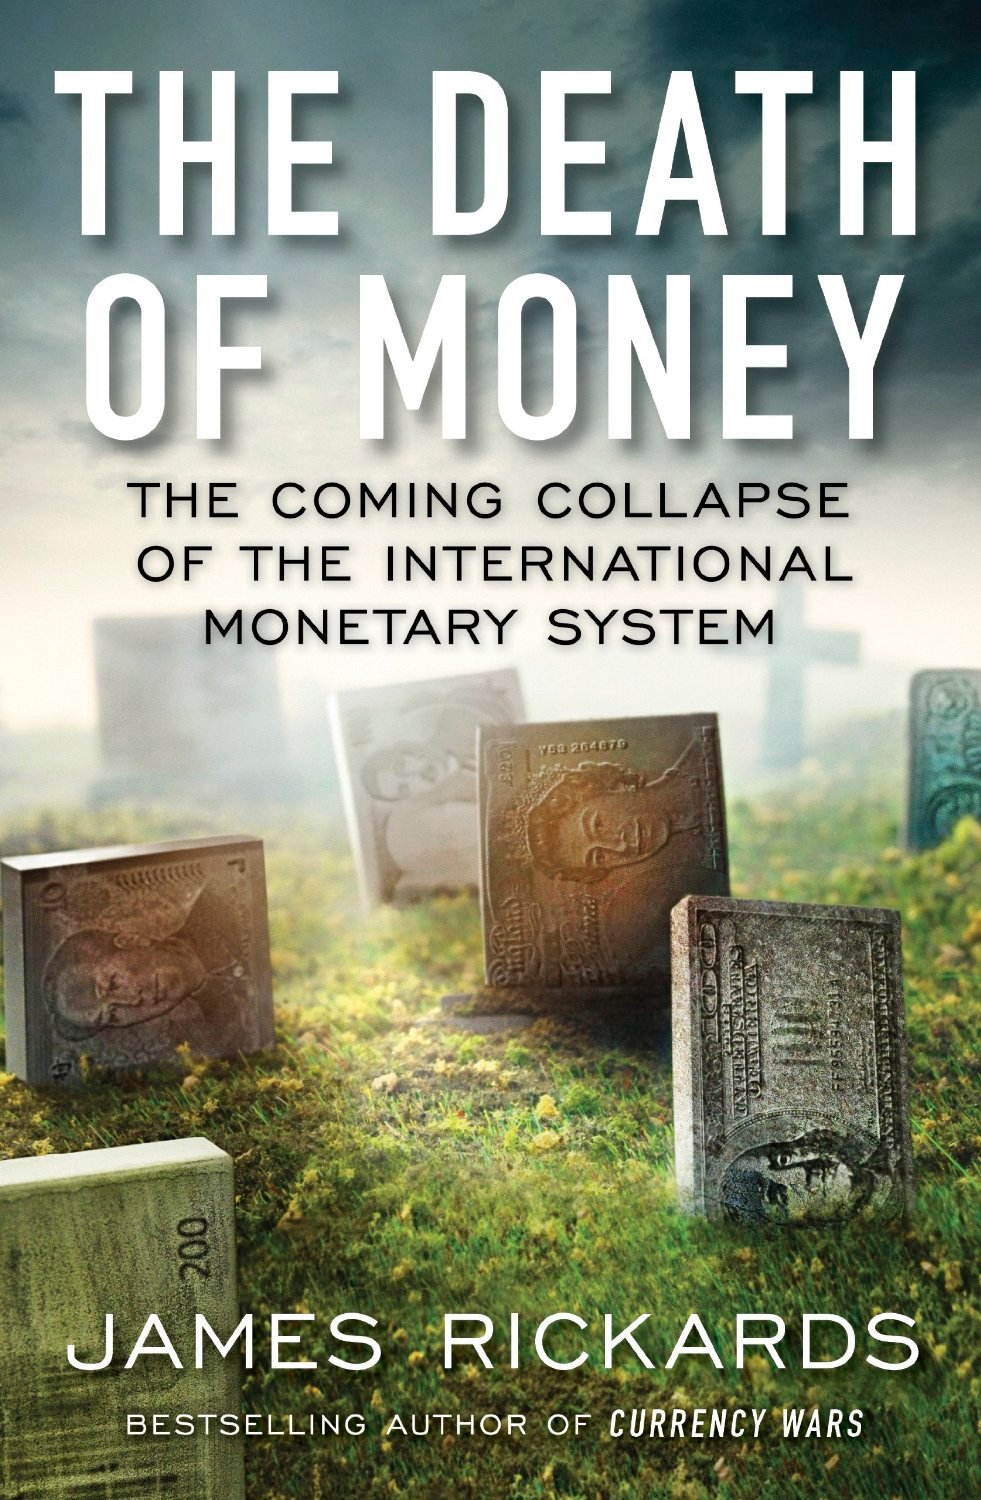 The Death of Money: The Coming Collapse of the International Monetary System